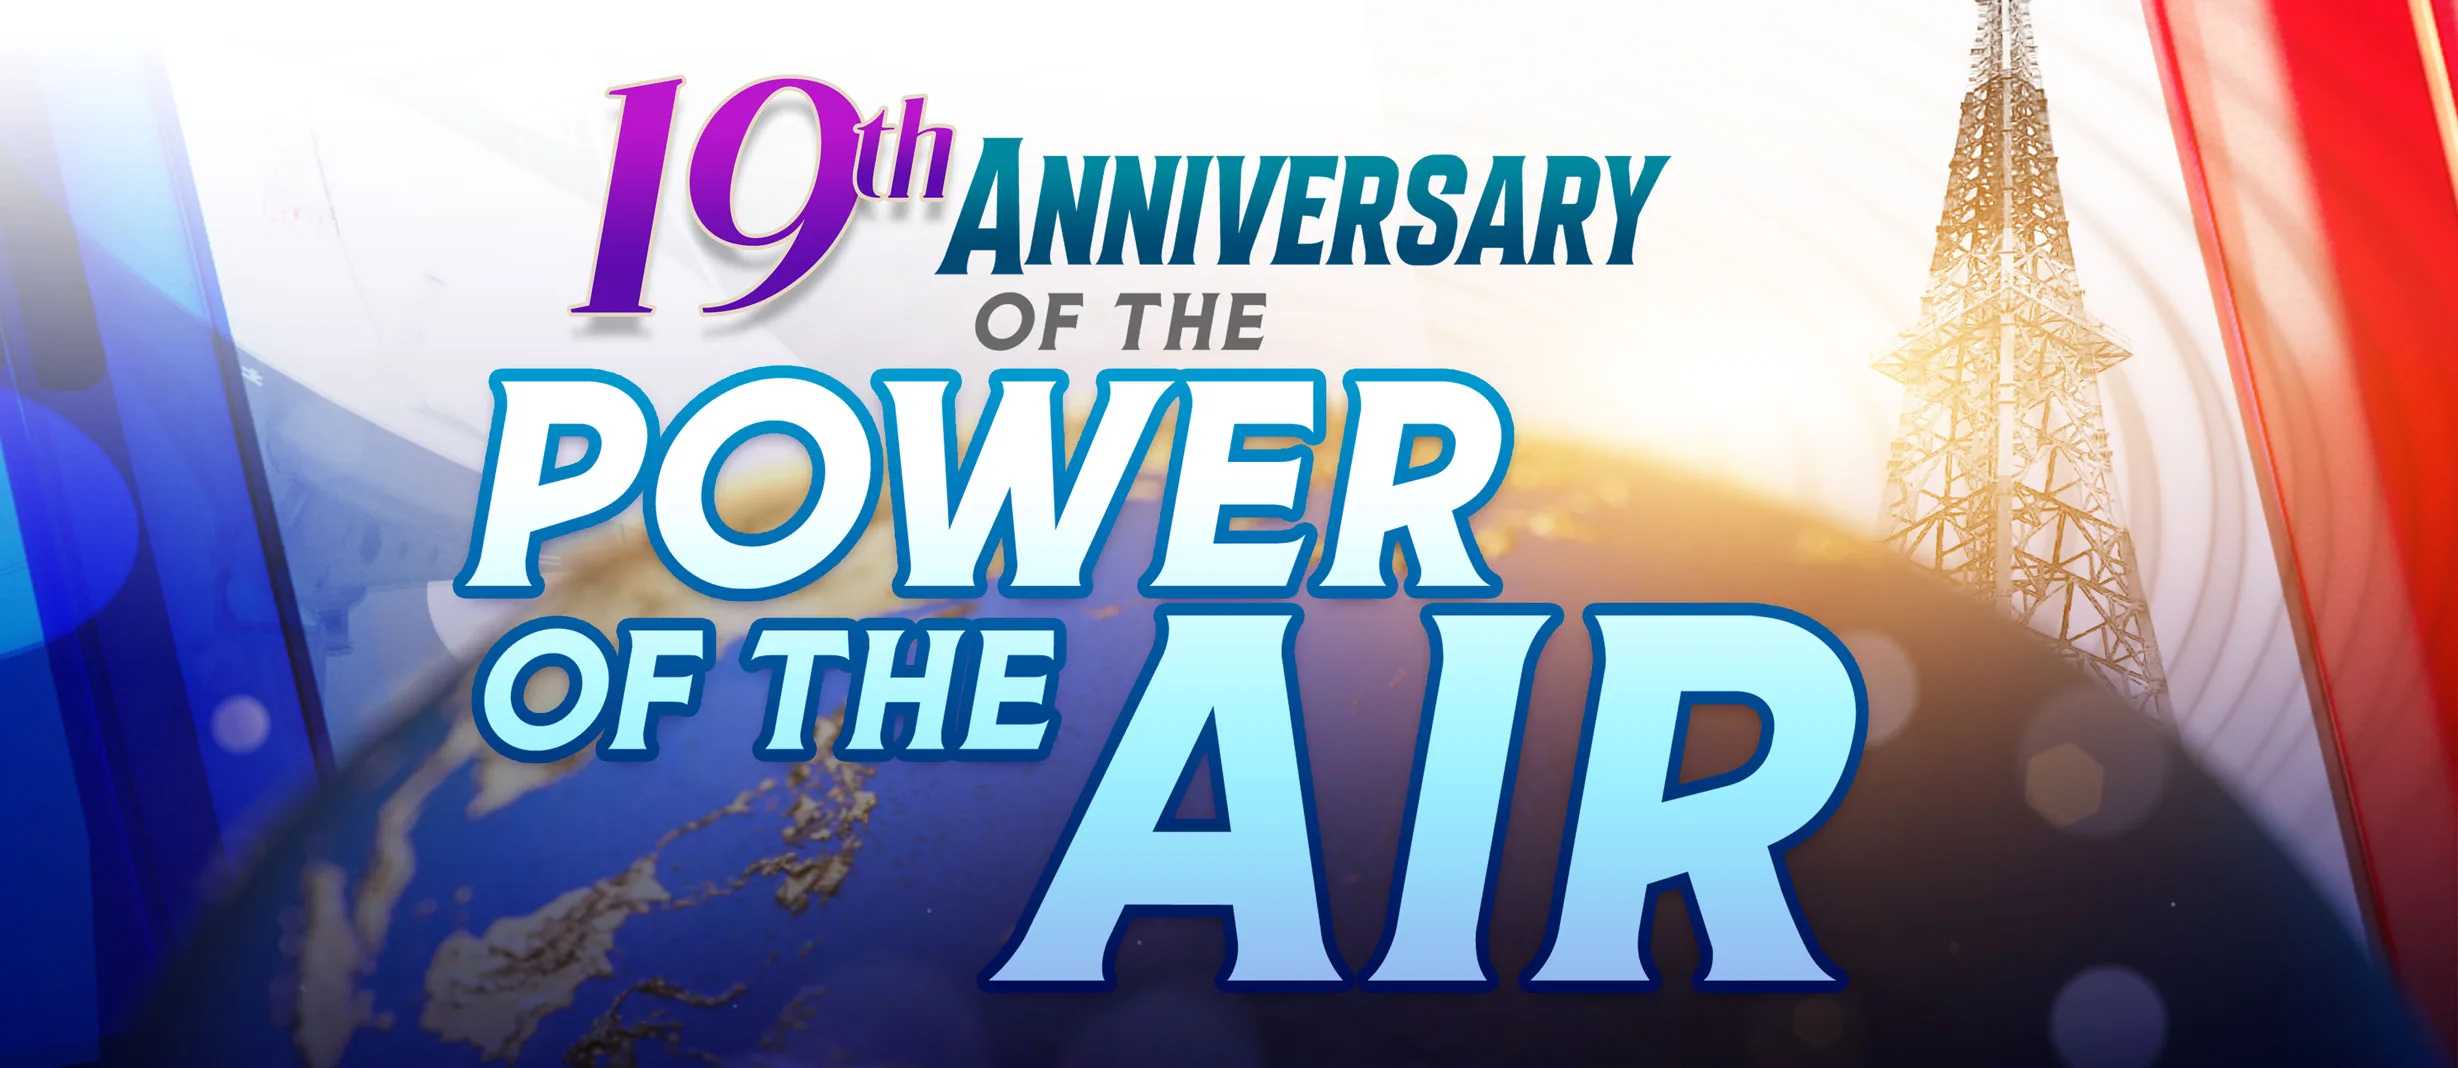 19TH ANNIVERSARY OF THE POWER OF THE AIR